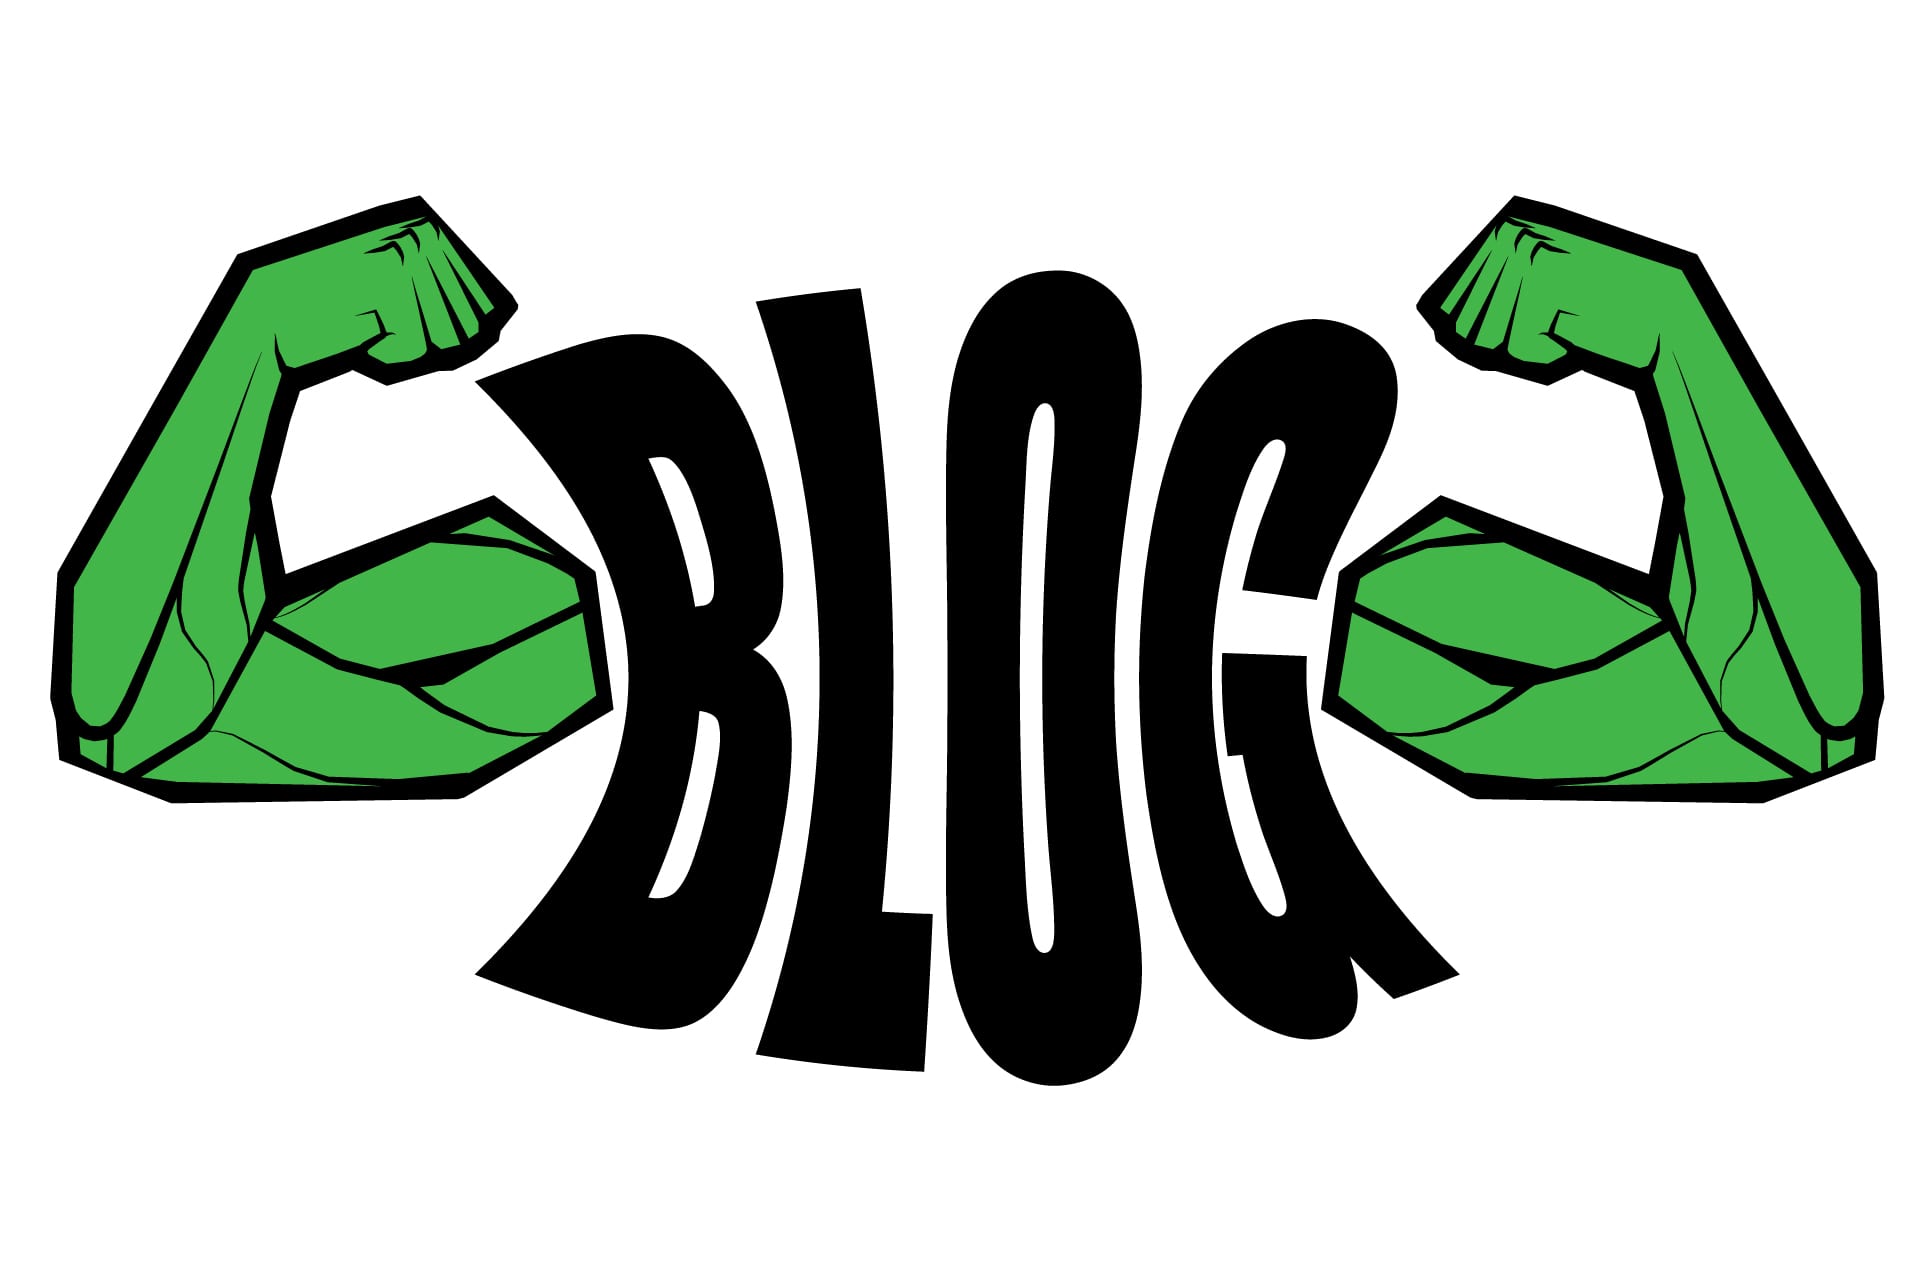 The reasons your small business should have a blog are more powerful than you can imagine.